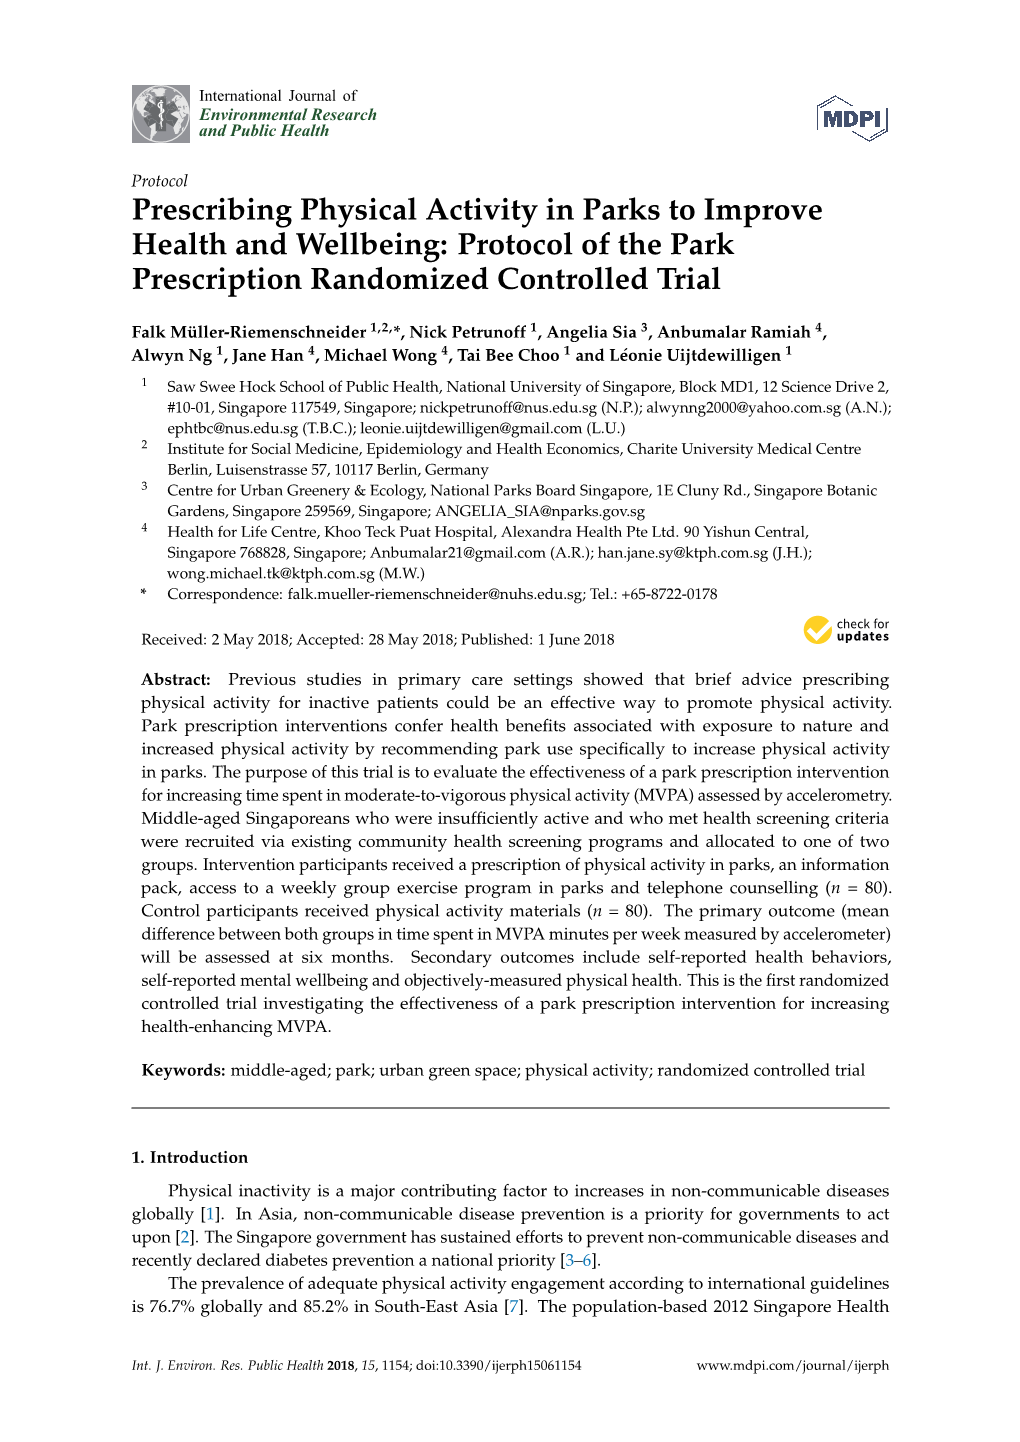 Prescribing Physical Activity in Parks to Improve Health and Wellbeing: Protocol of the Park Prescription Randomized Controlled Trial